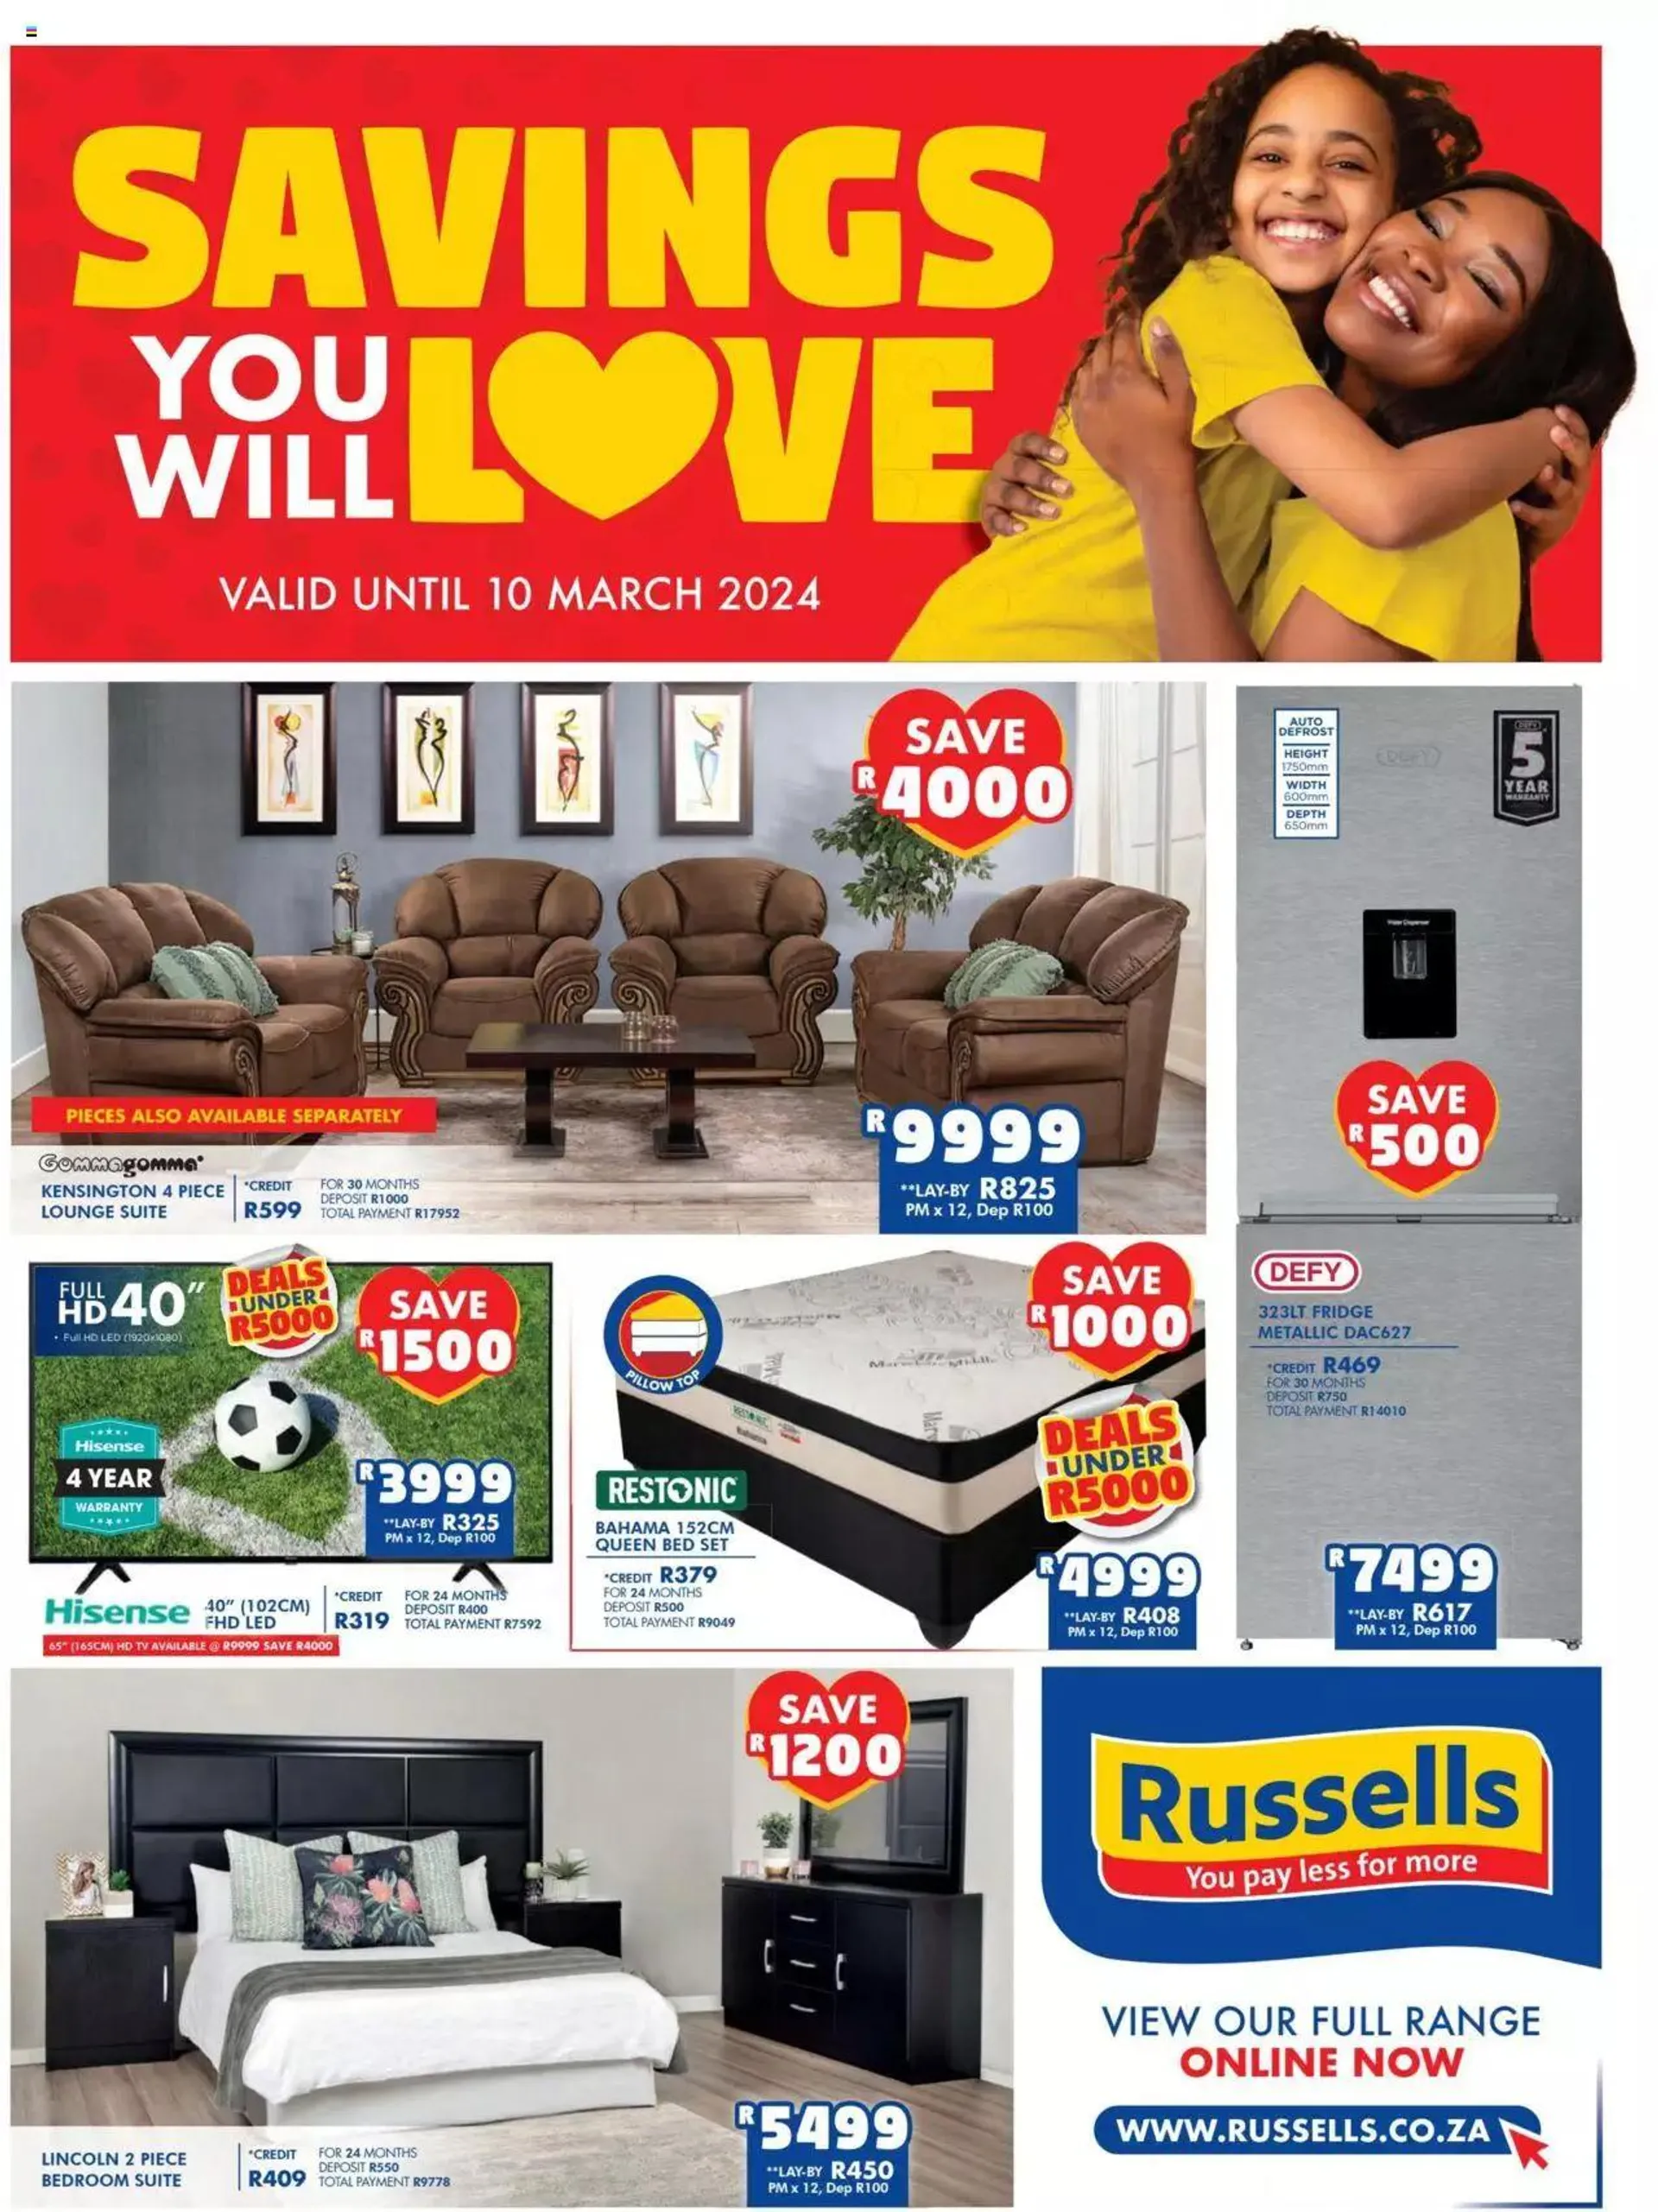 Russells - Specials - 26 February 10 March 2024 - Page 1